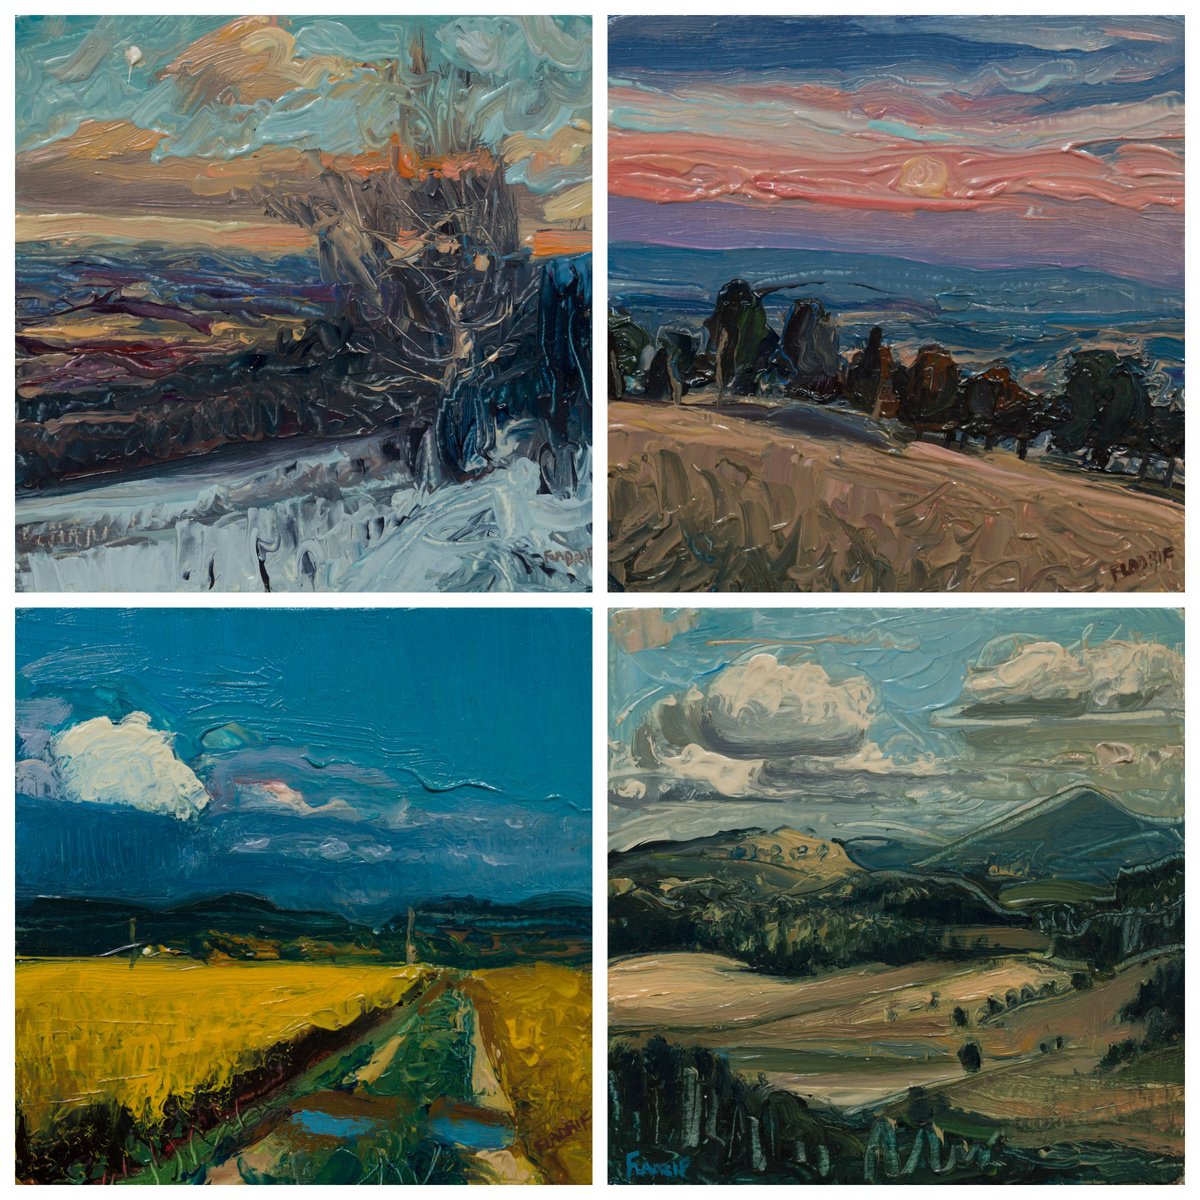 Four Seasons in the Mountains by Wojciech Pater